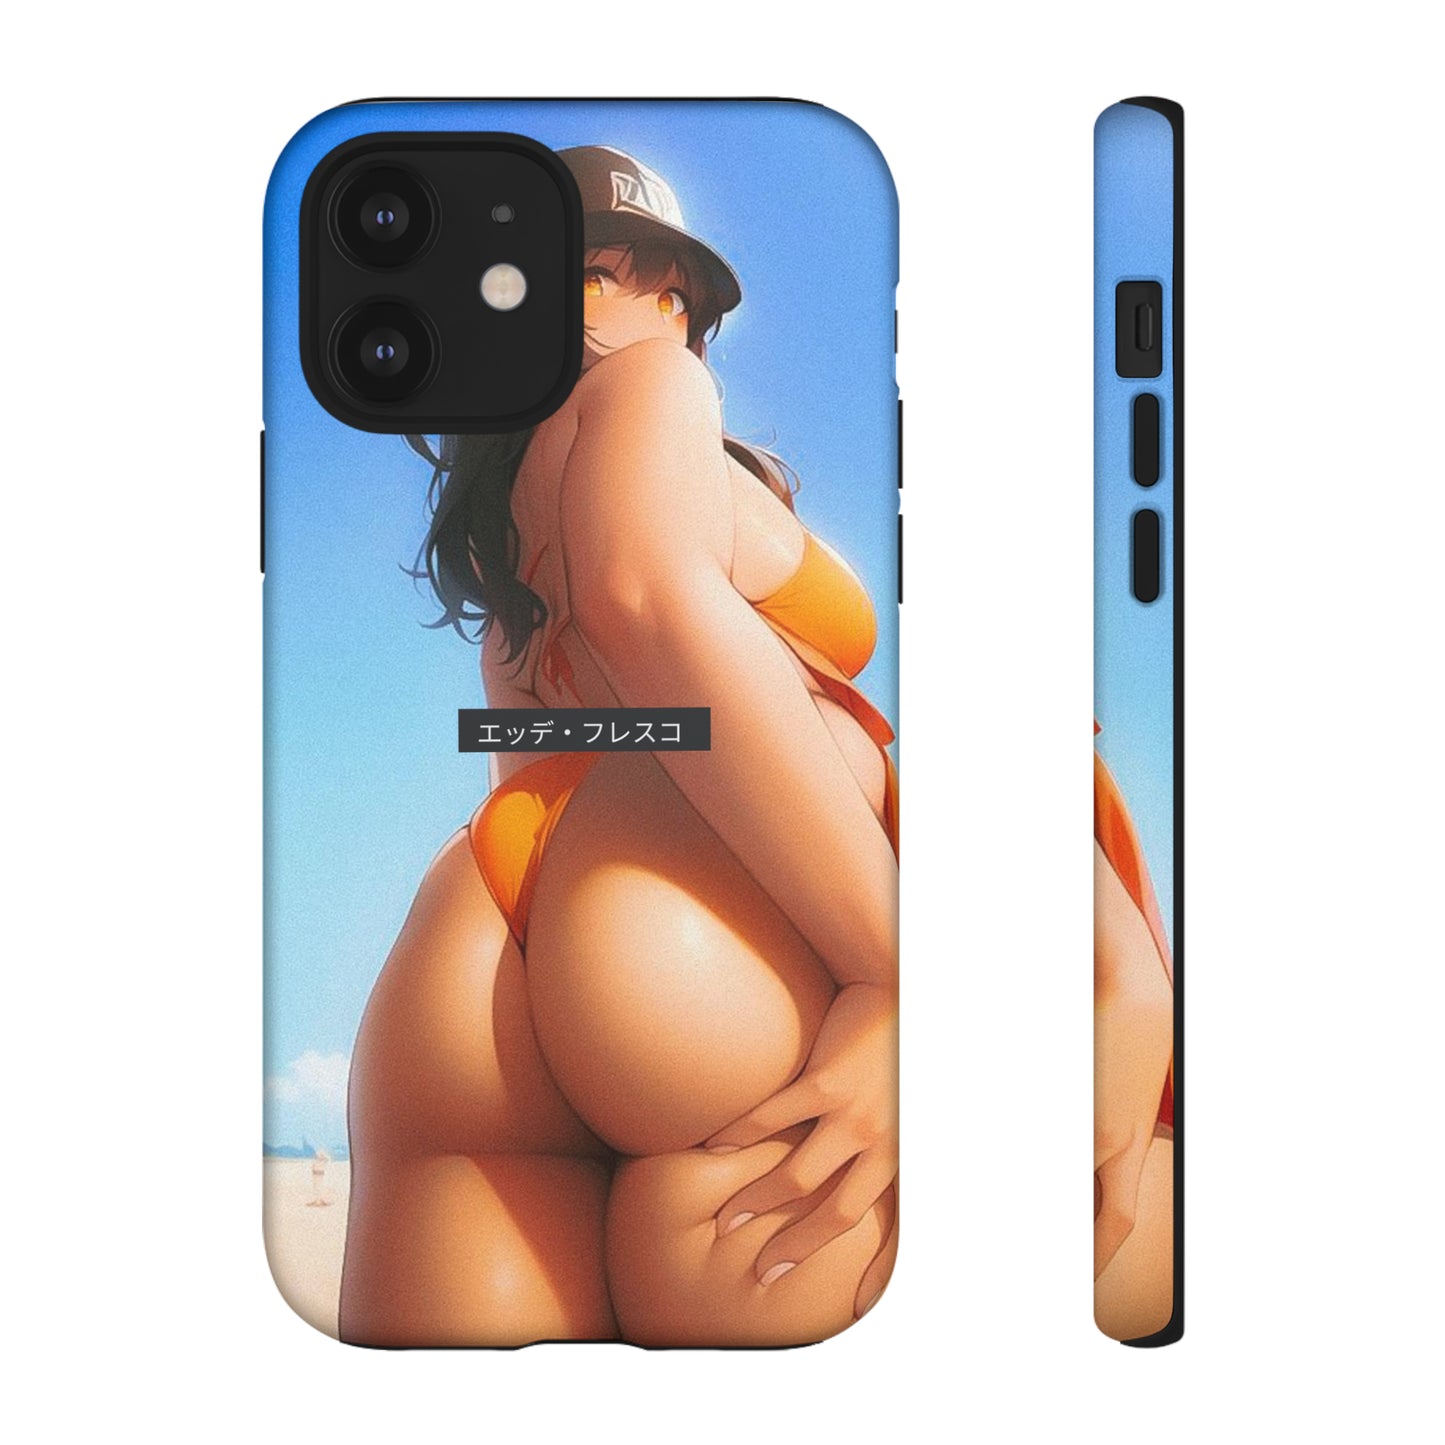 Anime Style Art Tough Cases- "Matching the Sunset"